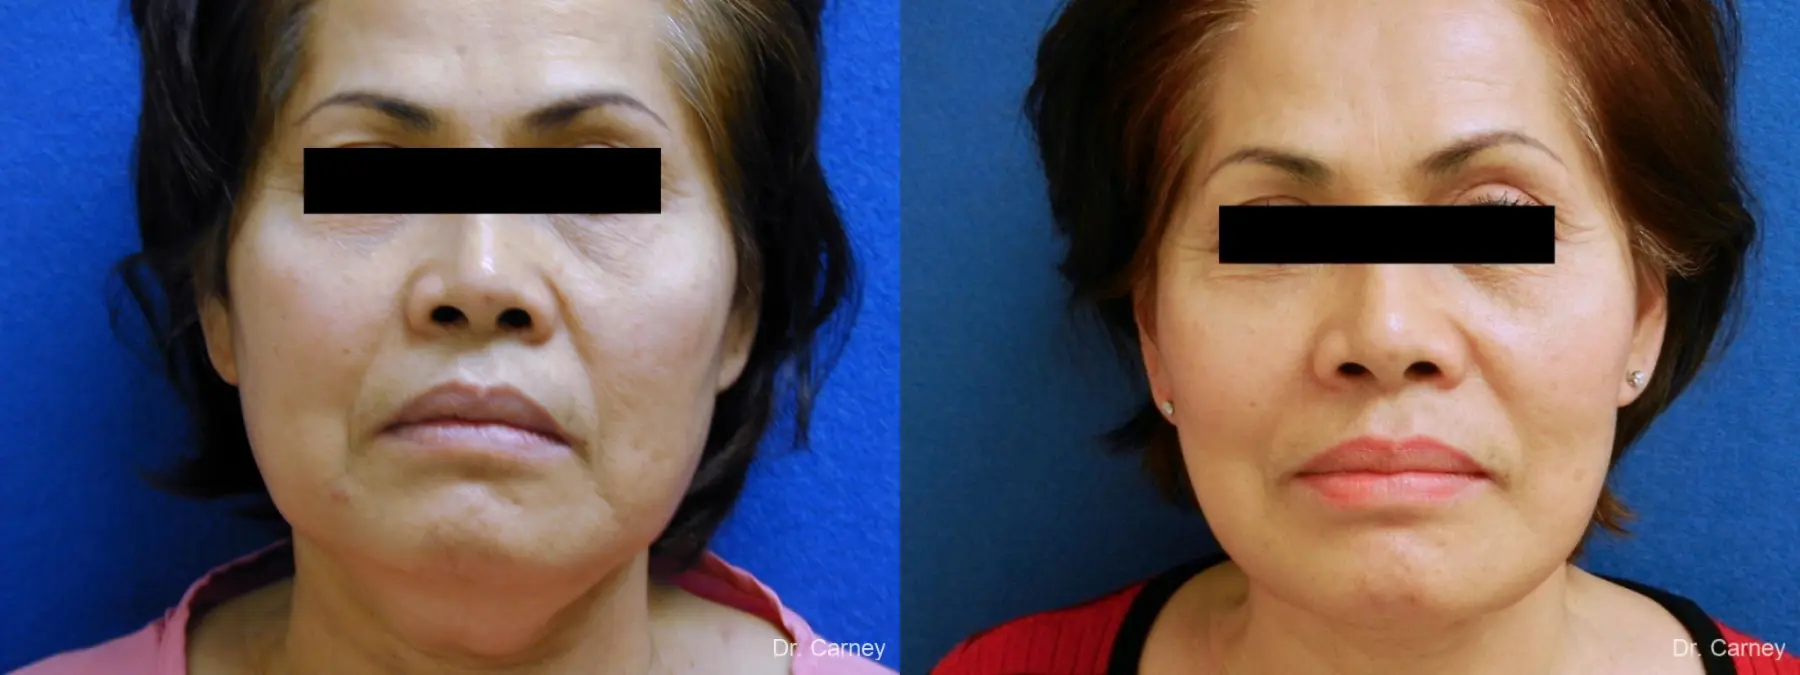 Virginia Beach Neck Lift 1268 - Before and After